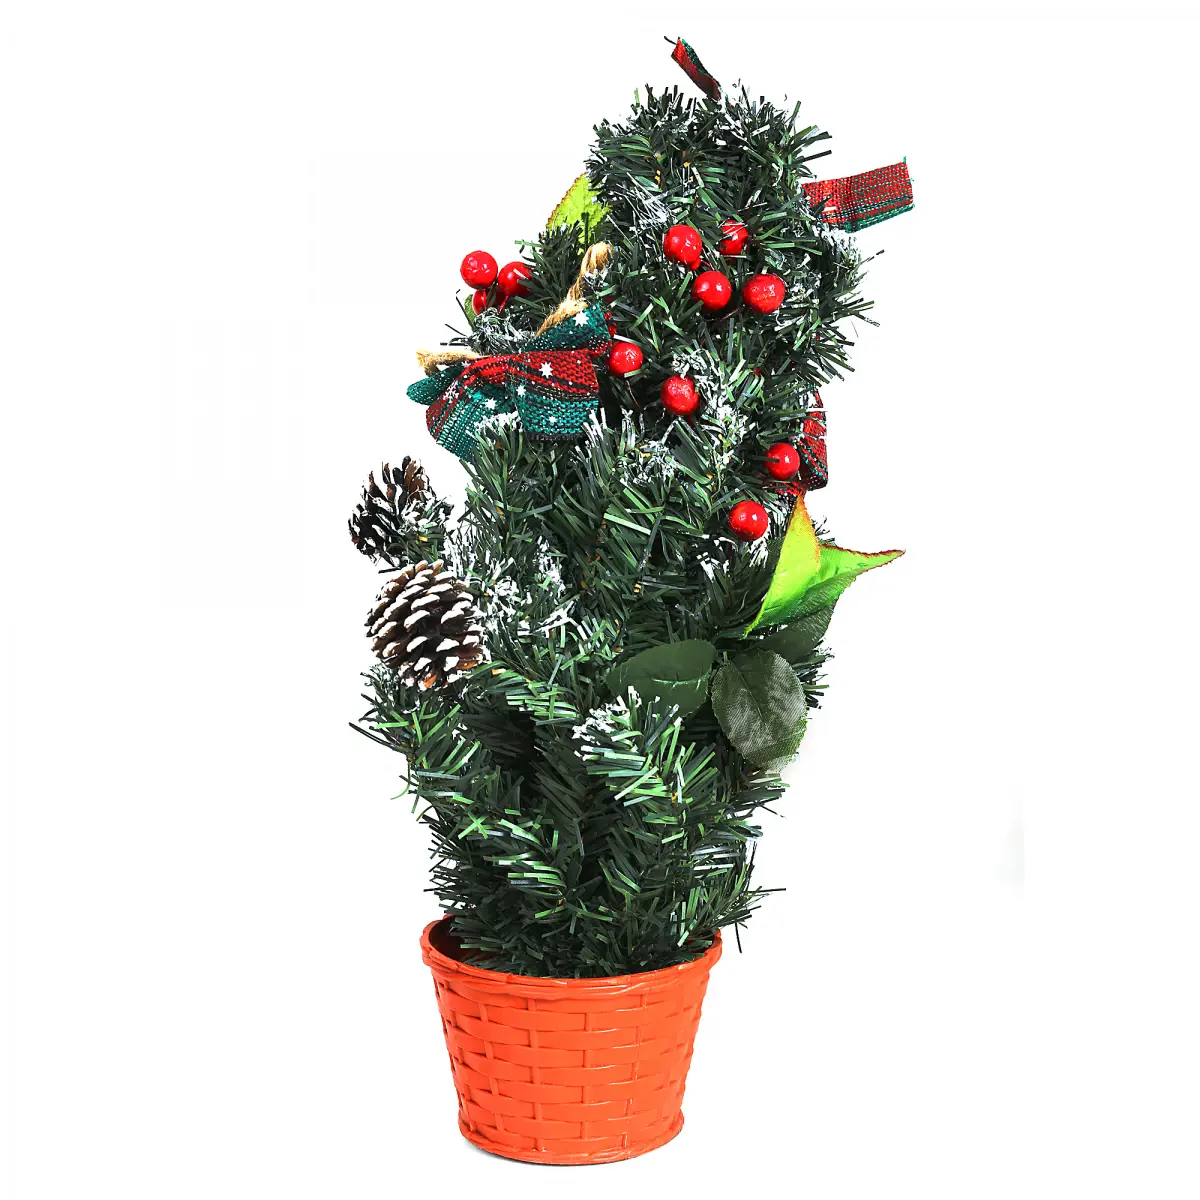 Boing Christmas Tree Decorations, 505cm, Red